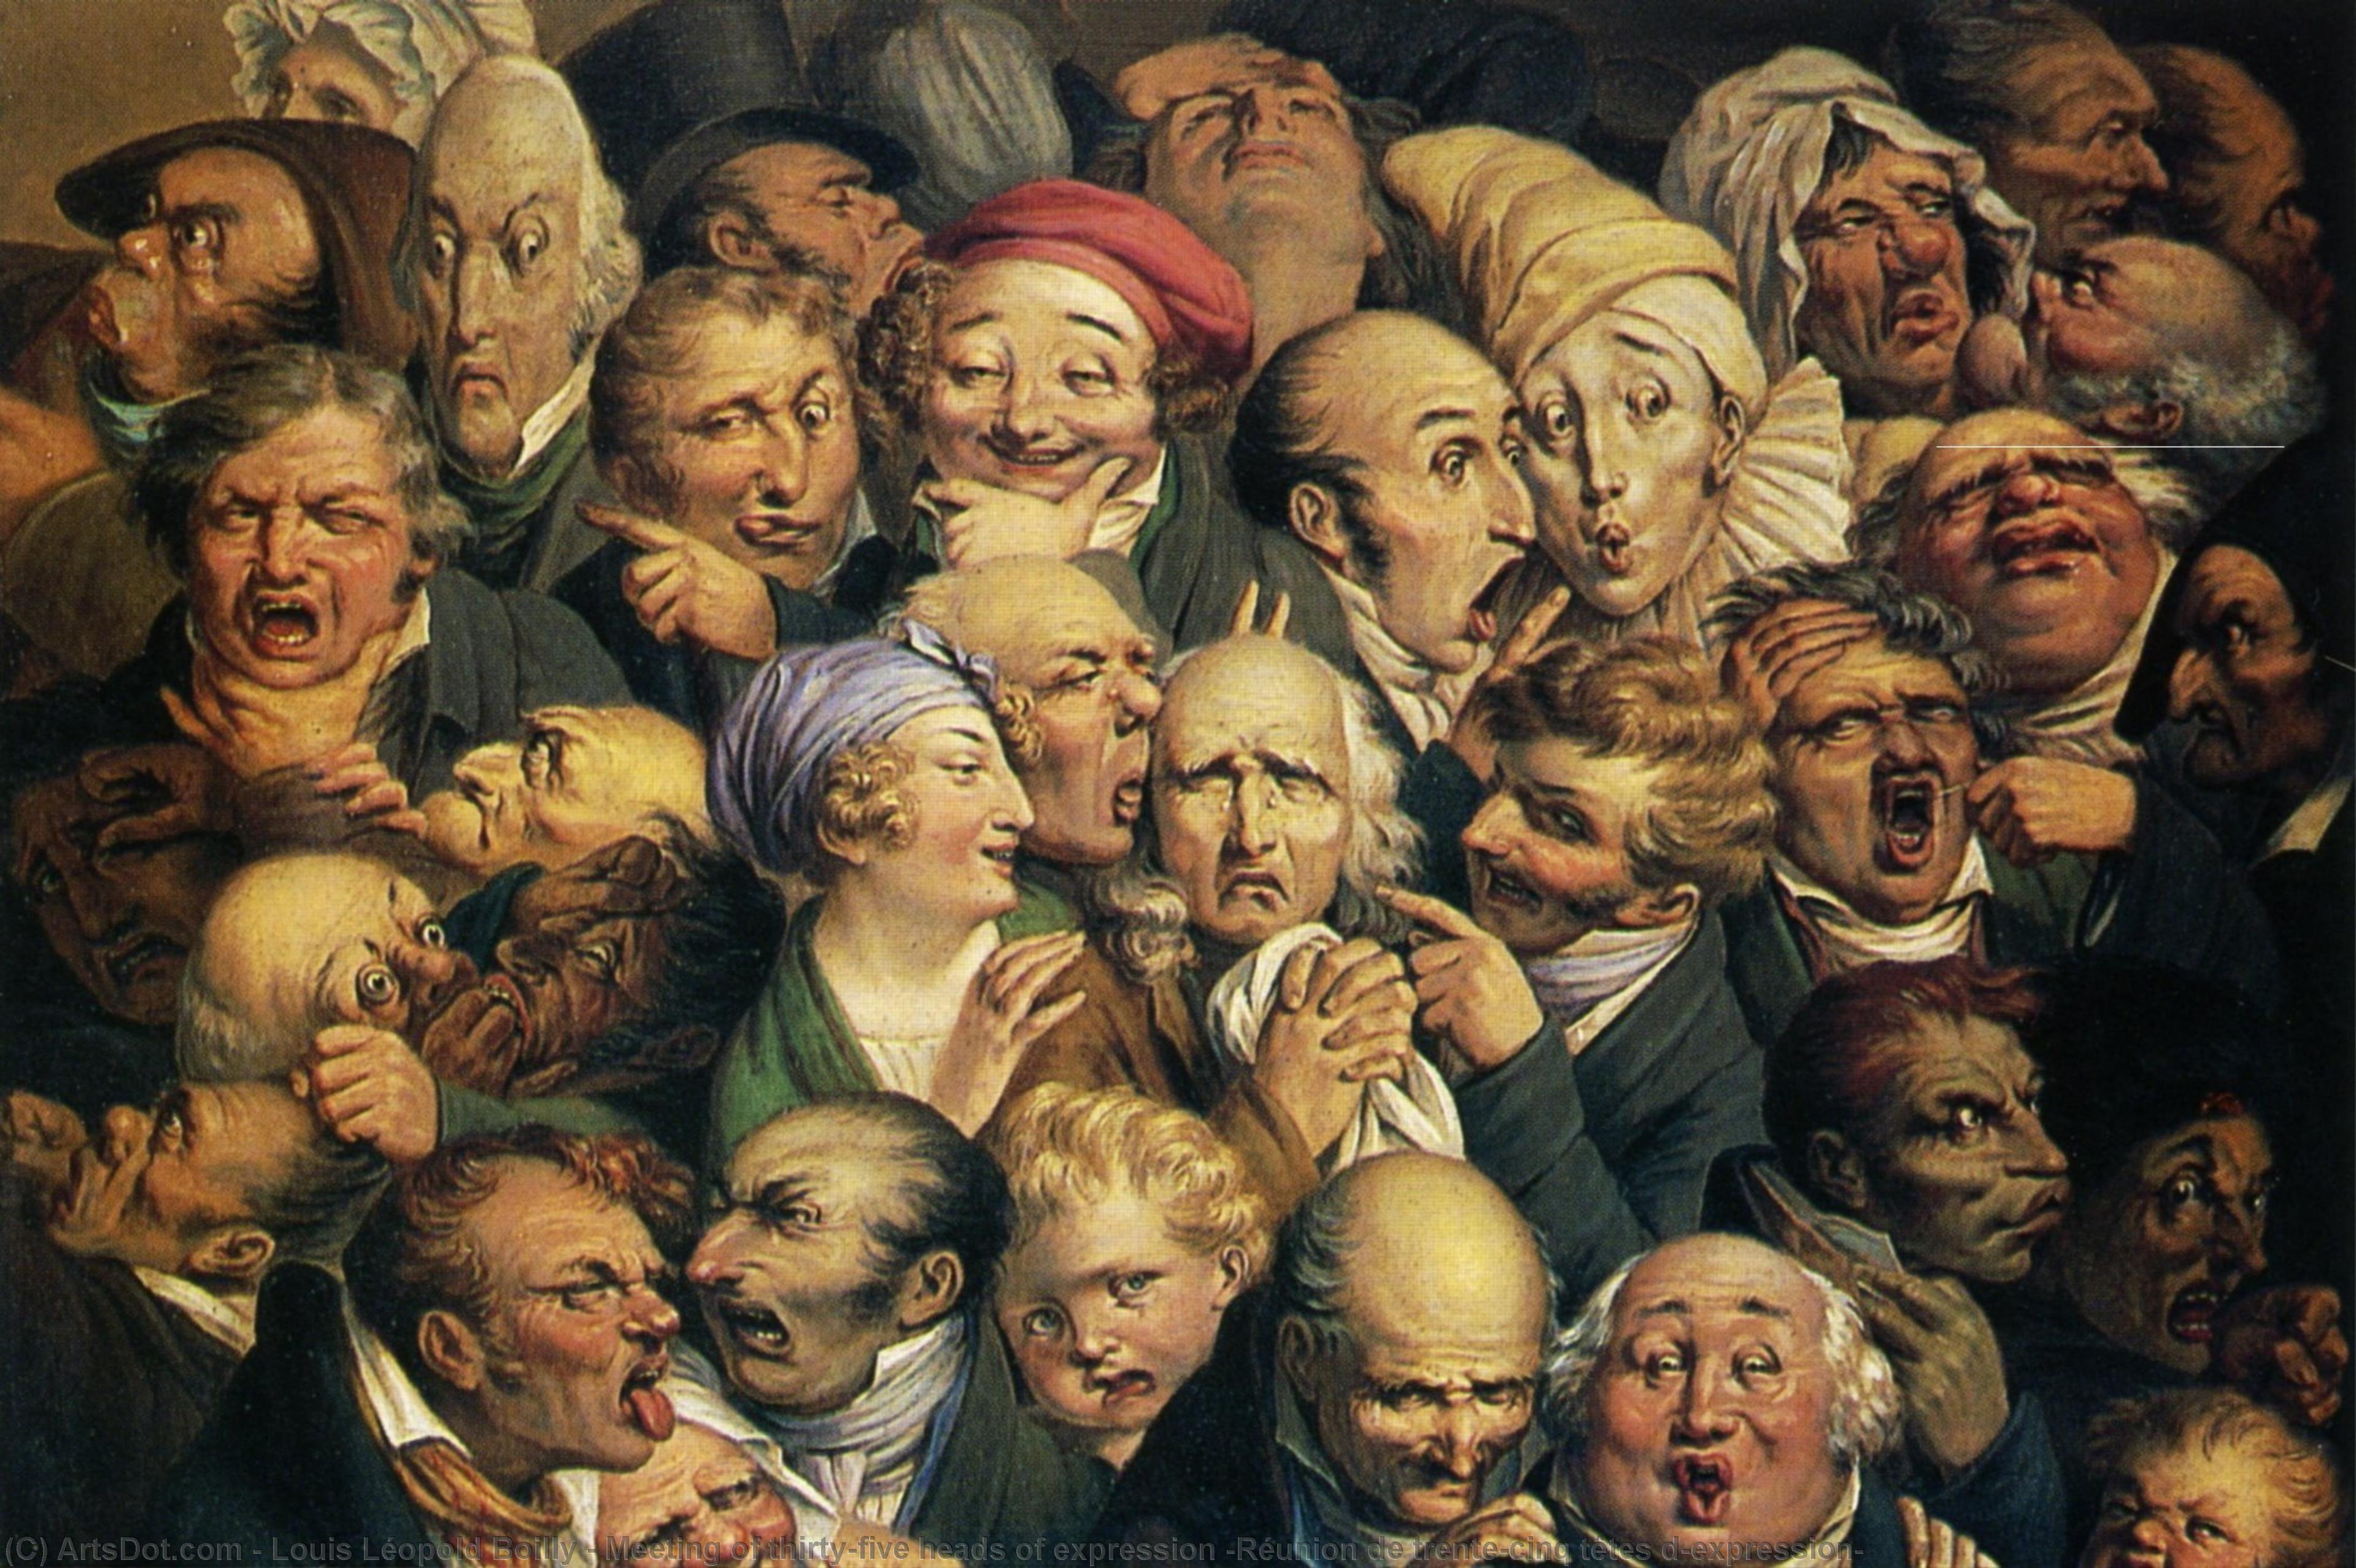 WikiOO.org - Encyclopedia of Fine Arts - Maleri, Artwork Louis Léopold Boilly - Meeting of thirty-five heads of expression (Réunion de trente-cinq têtes d'expression)